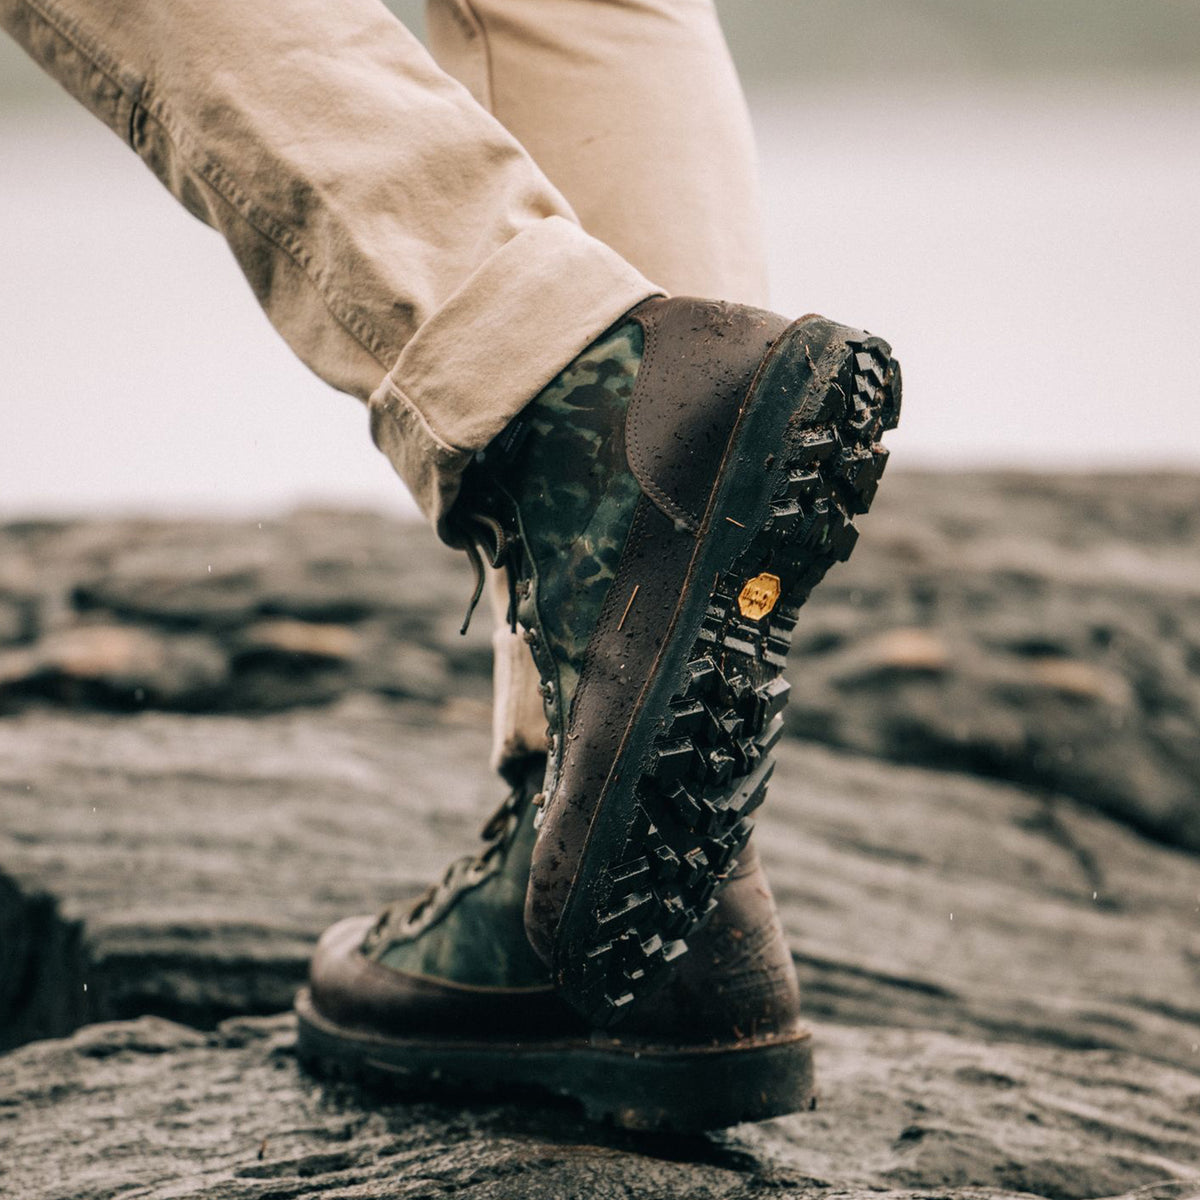 The Danner Ridge Mens Boot in Painted Camo | Taylor Stitch x Danner